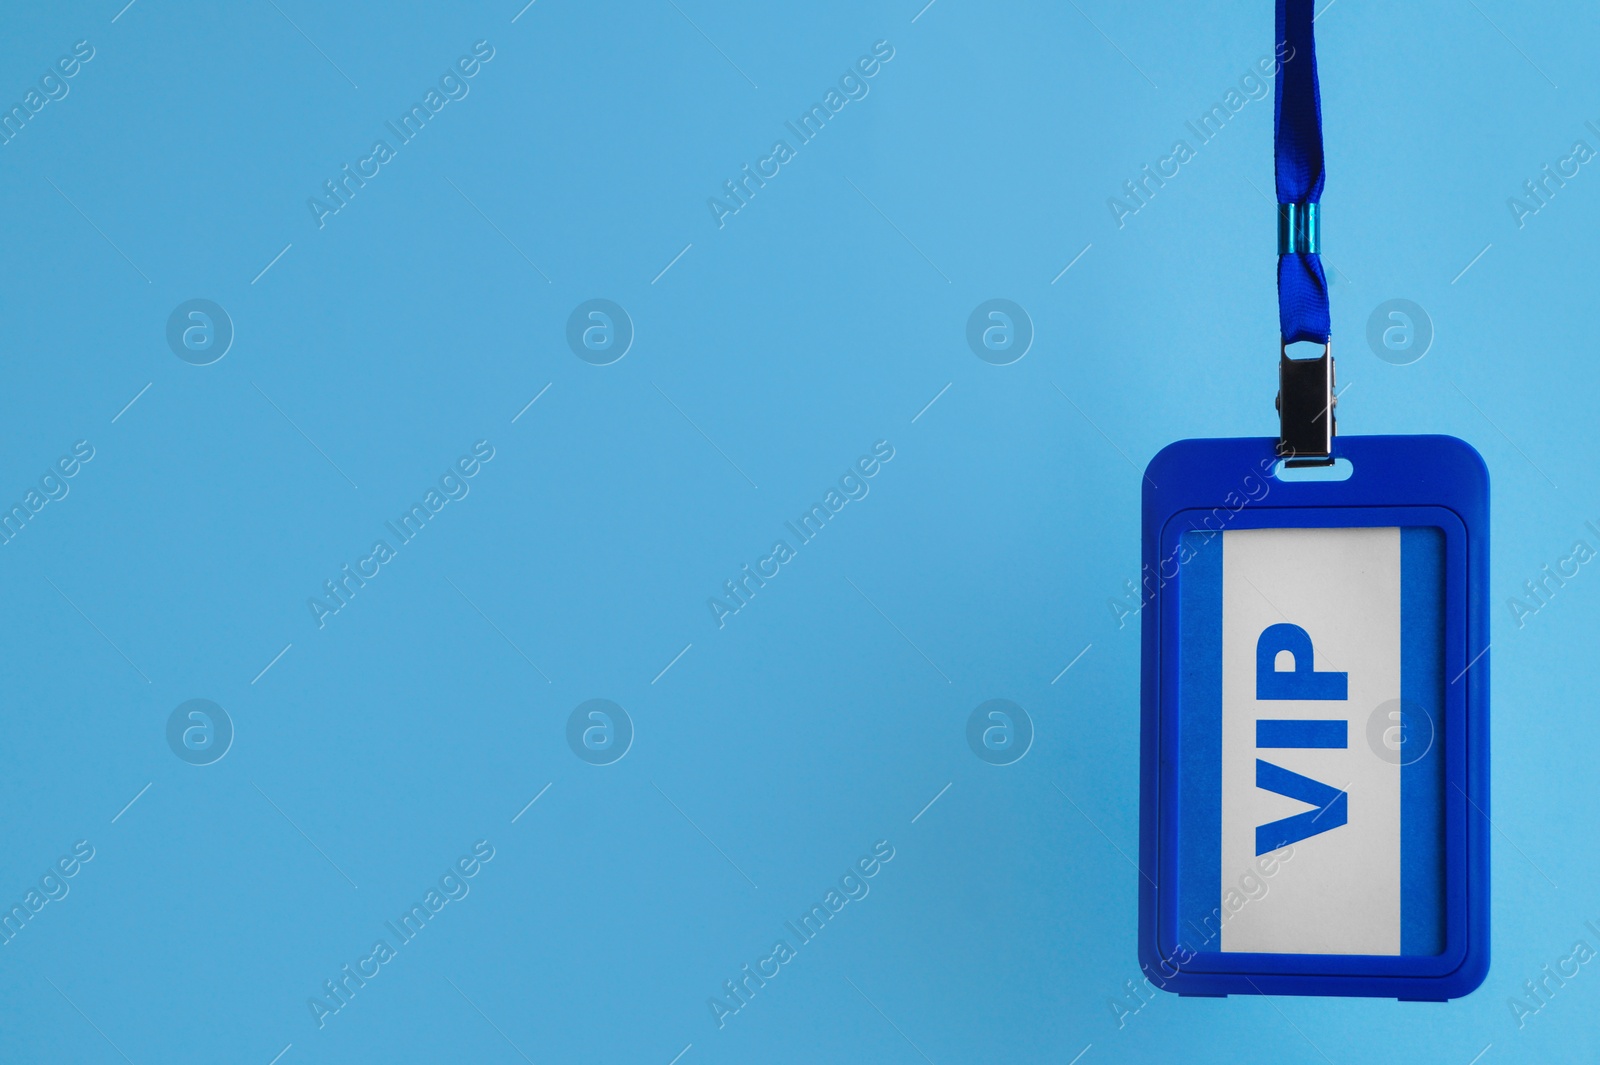 Photo of Plastic vip badge hanging on light blue background, space for text